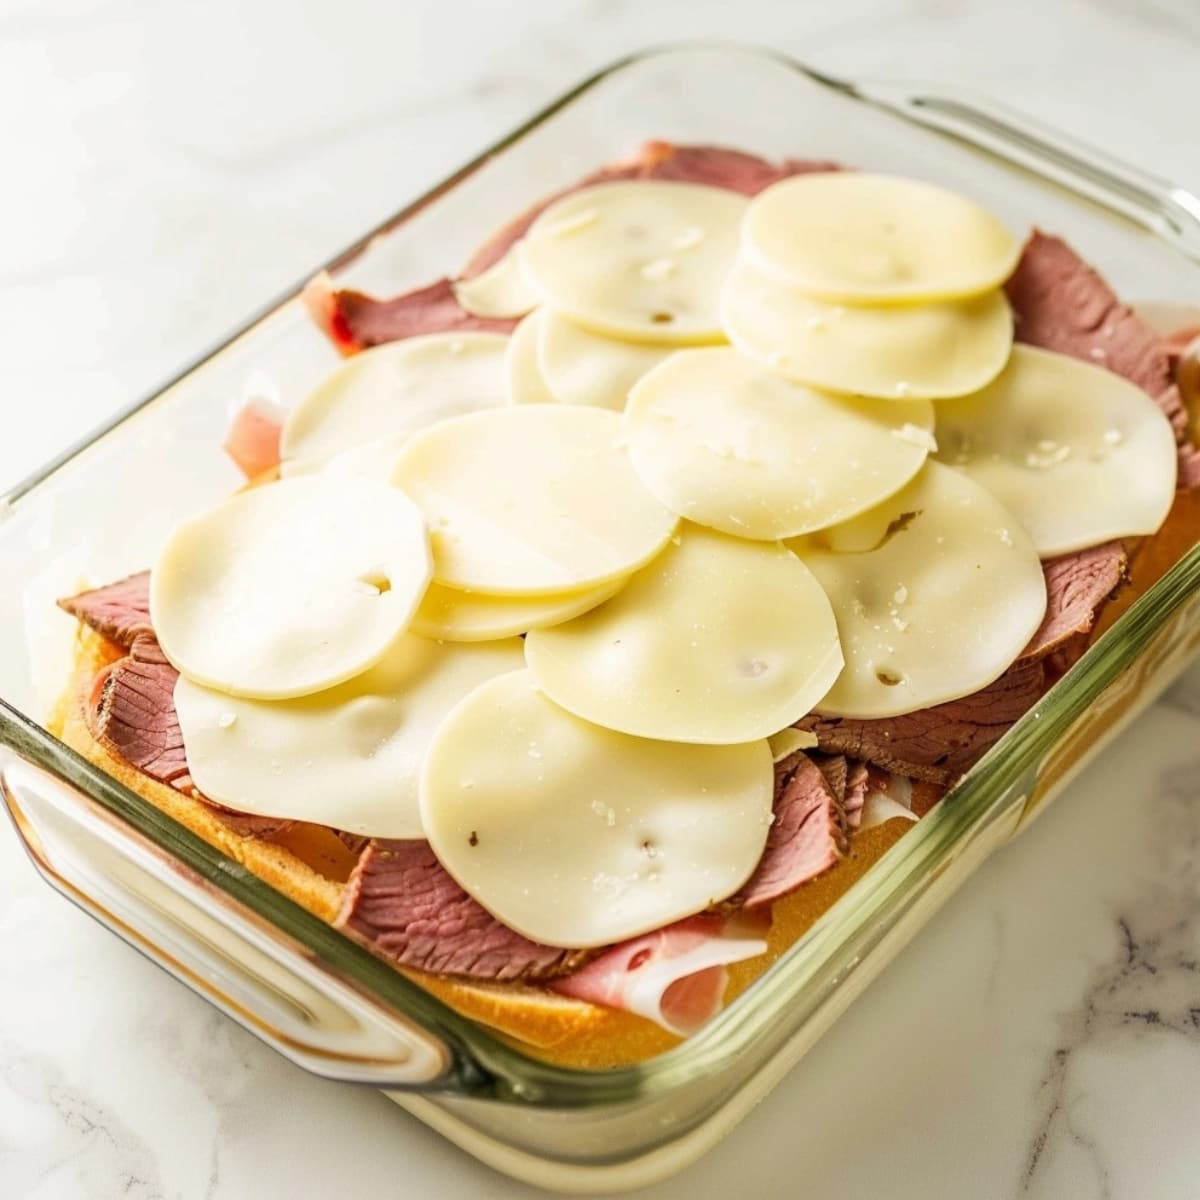 Hawaiian rolls topped with sliced roast beef and provolone cheese in a glass baking dish.